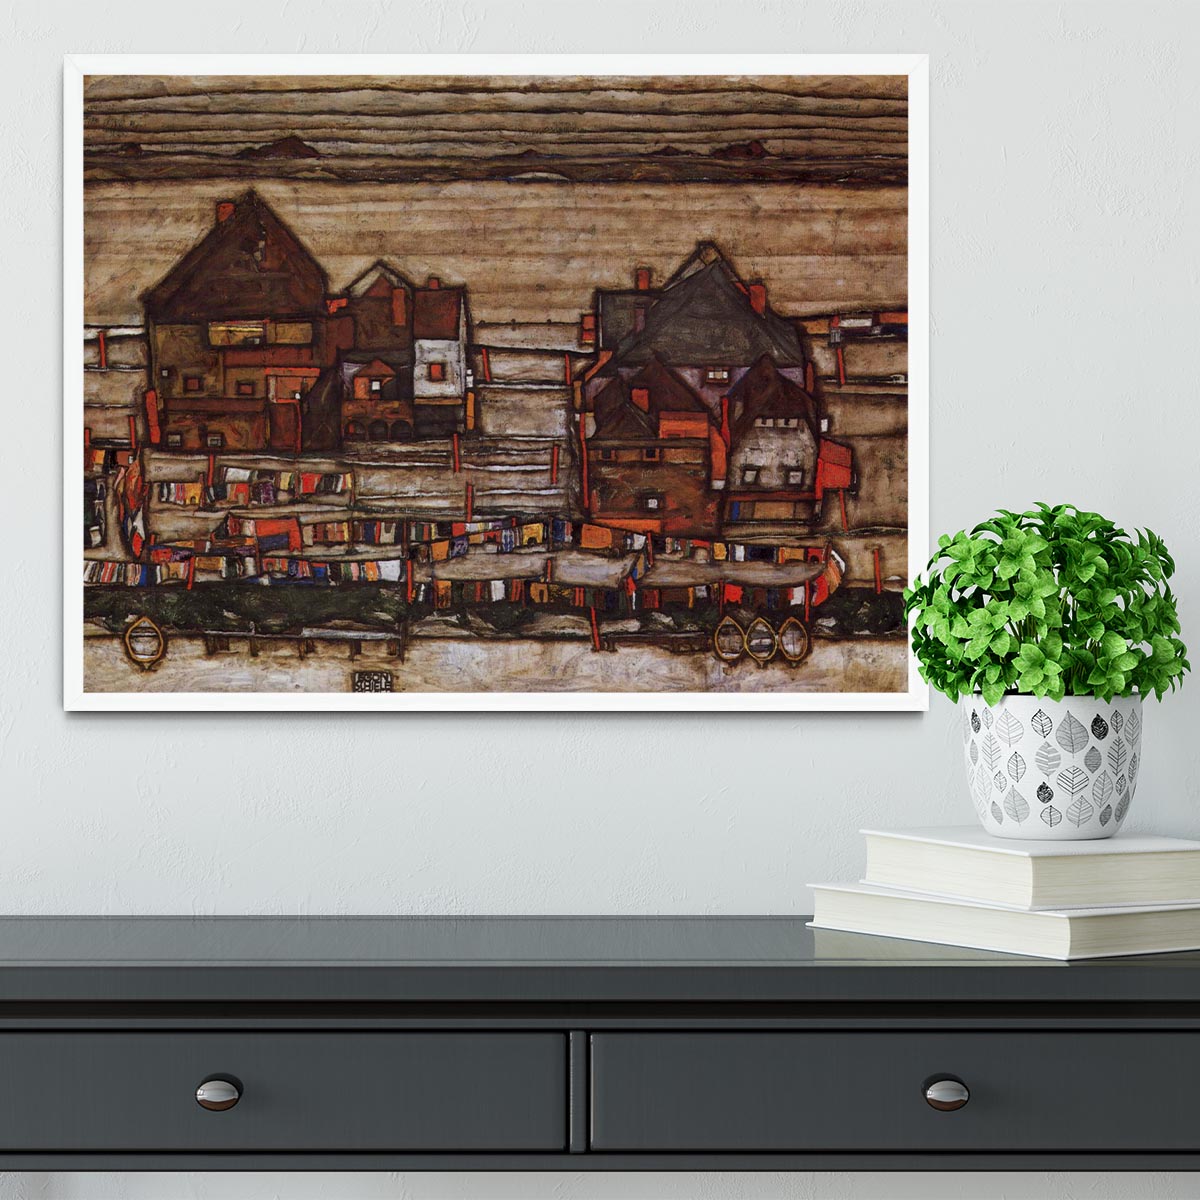 Houses with laundry lines and suburban by Egon Schiele Framed Print - Canvas Art Rocks -6